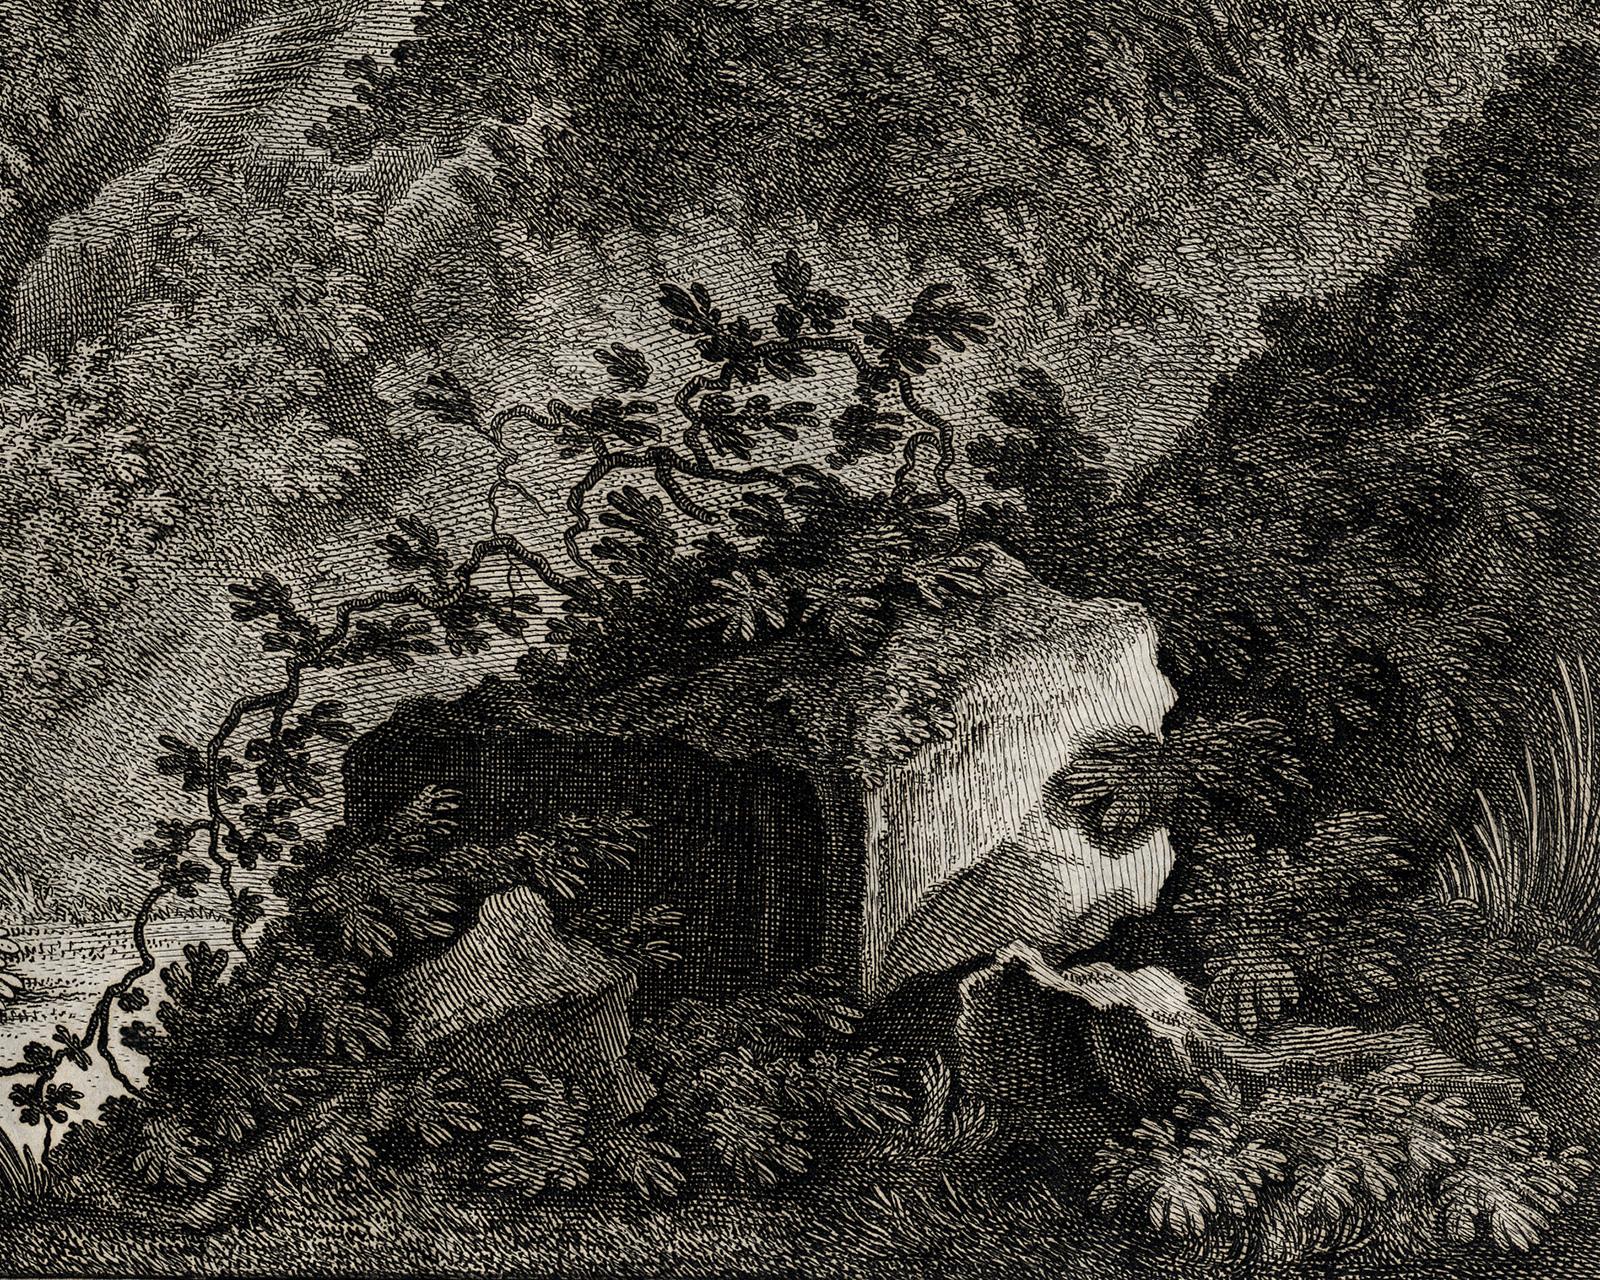 Hunting scene catching a badger in a trap by Ridinger - Engraving - 18th century - Black Landscape Print by Martin Elias Ridinger